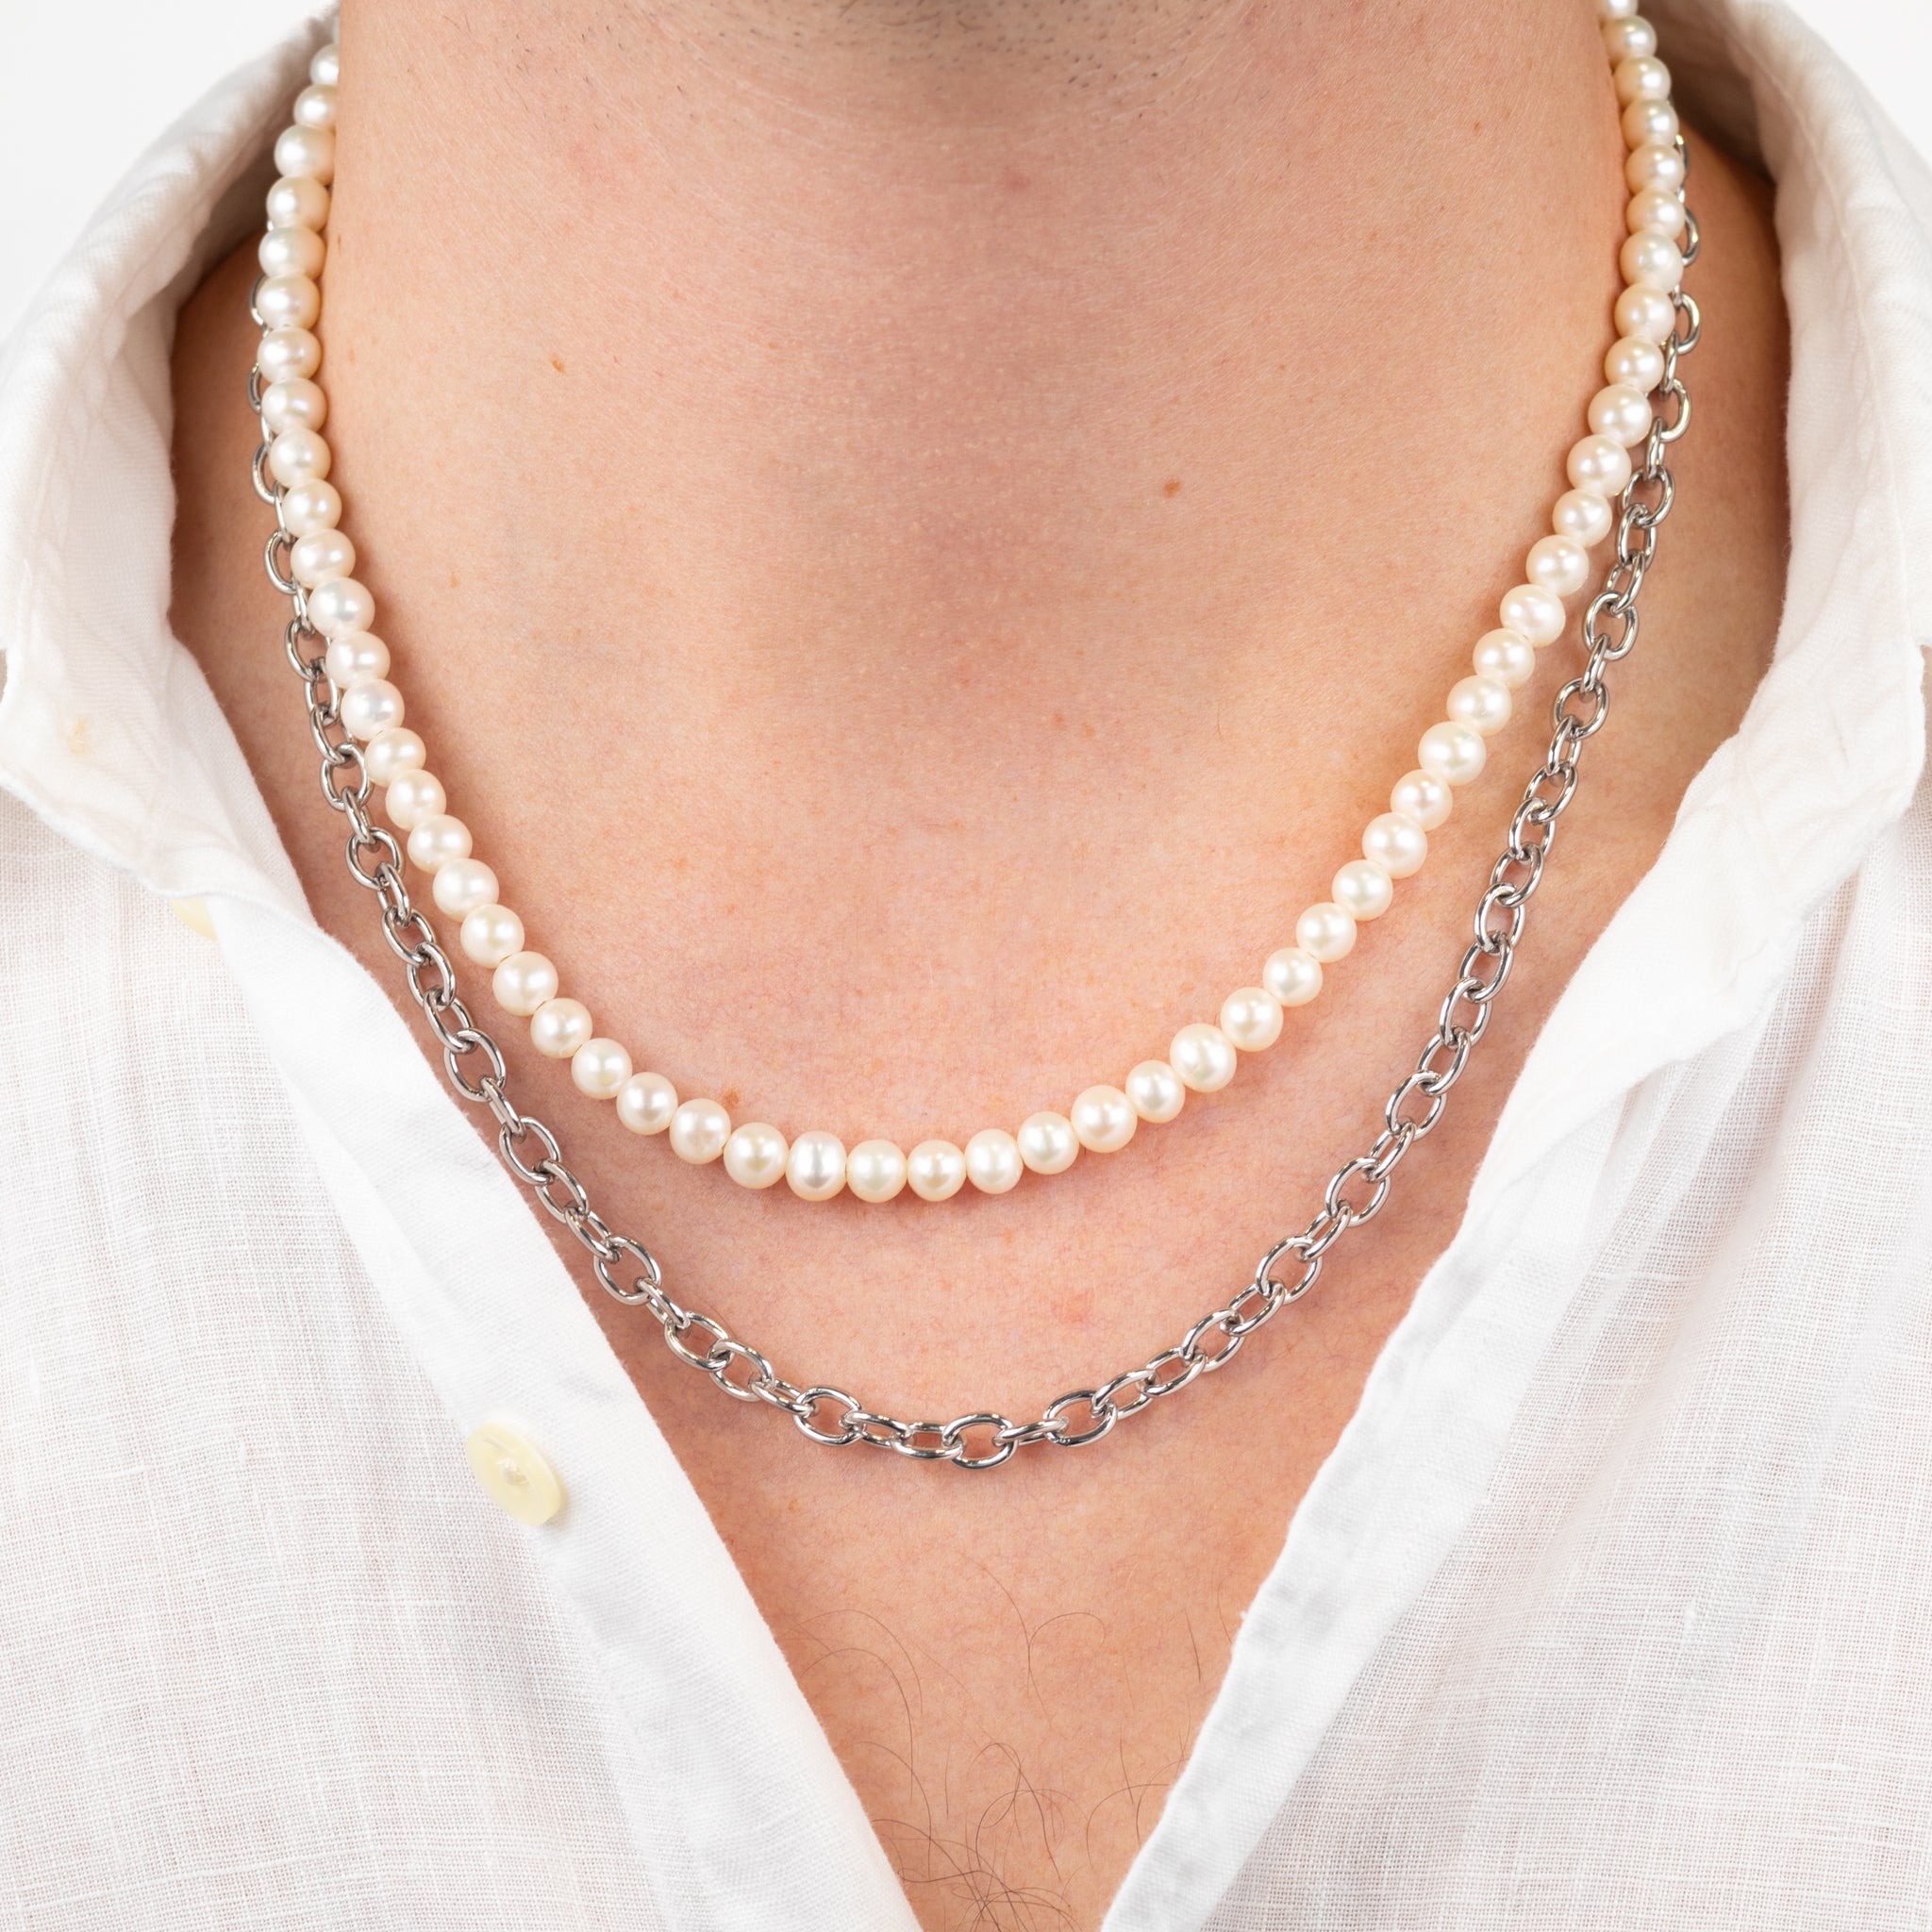 Stainless Steel and White Freshwater Pearl Double Link Necklace